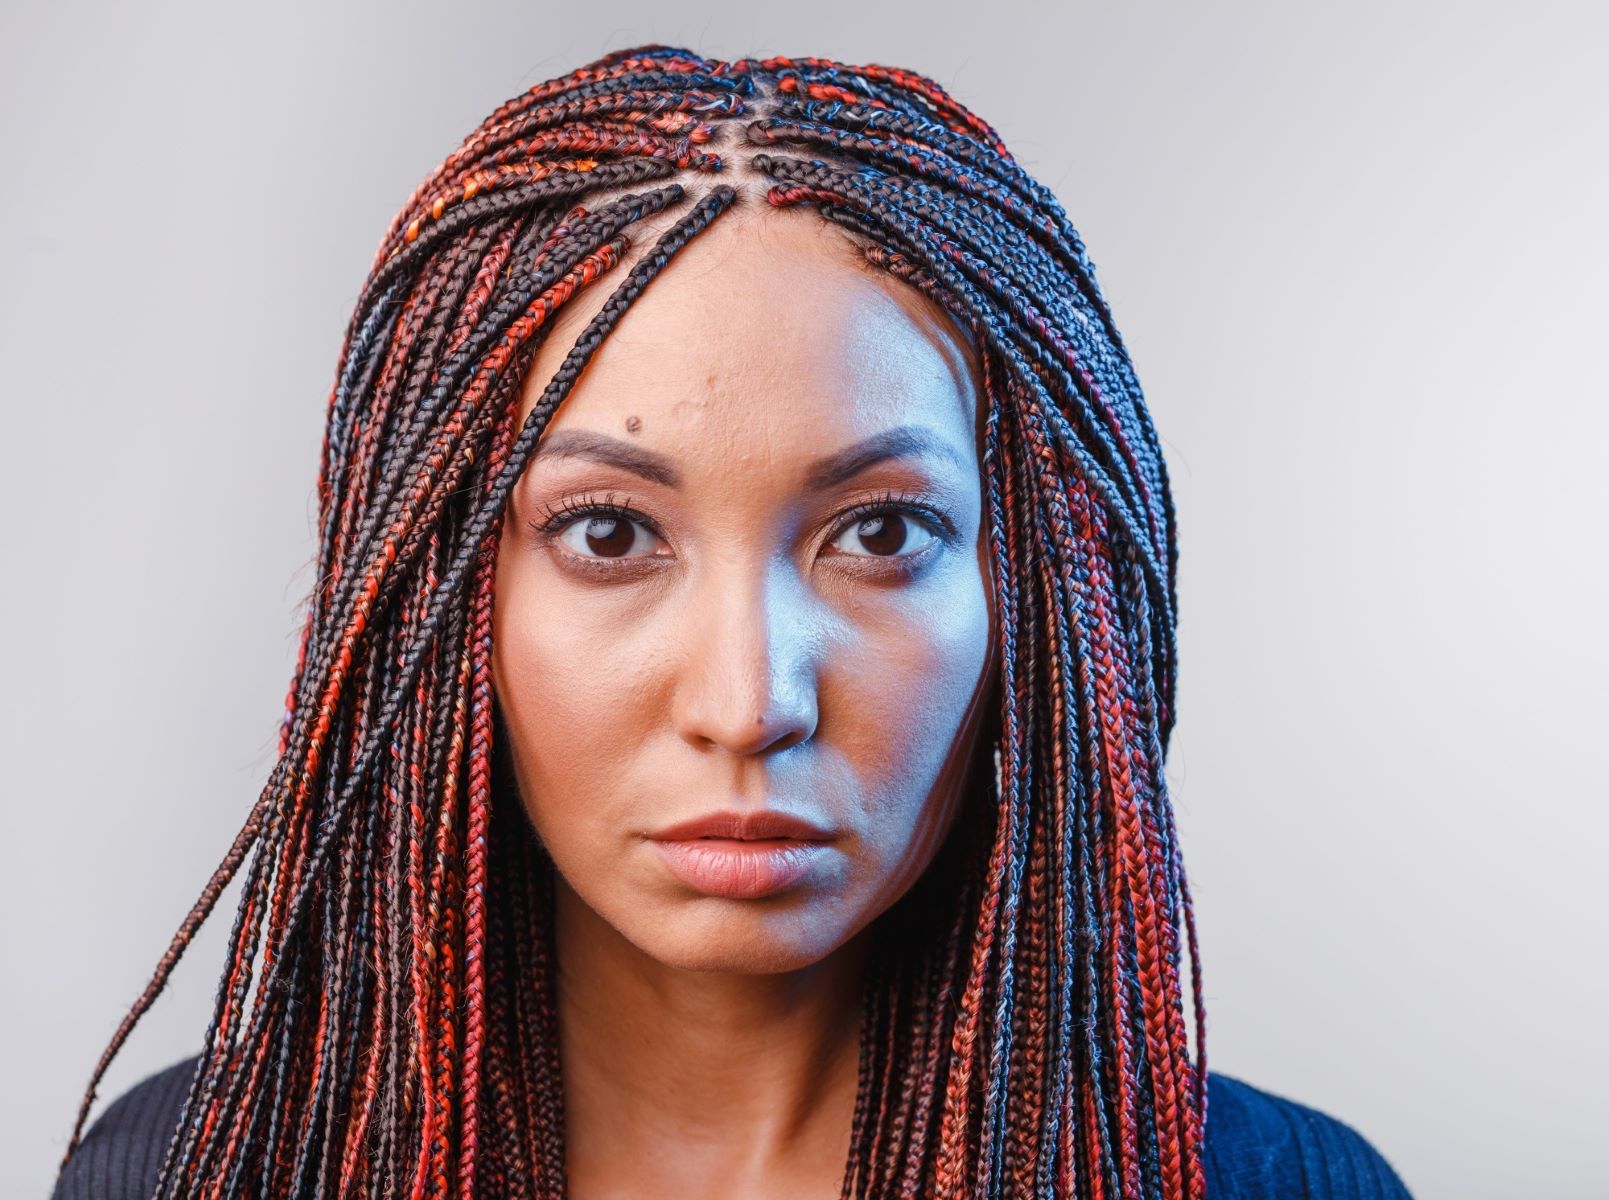 The Double Standard: Why Box Braids On White Girls Are Offensive, But Straight Blonde Wigs On Black Girls Are Acceptable